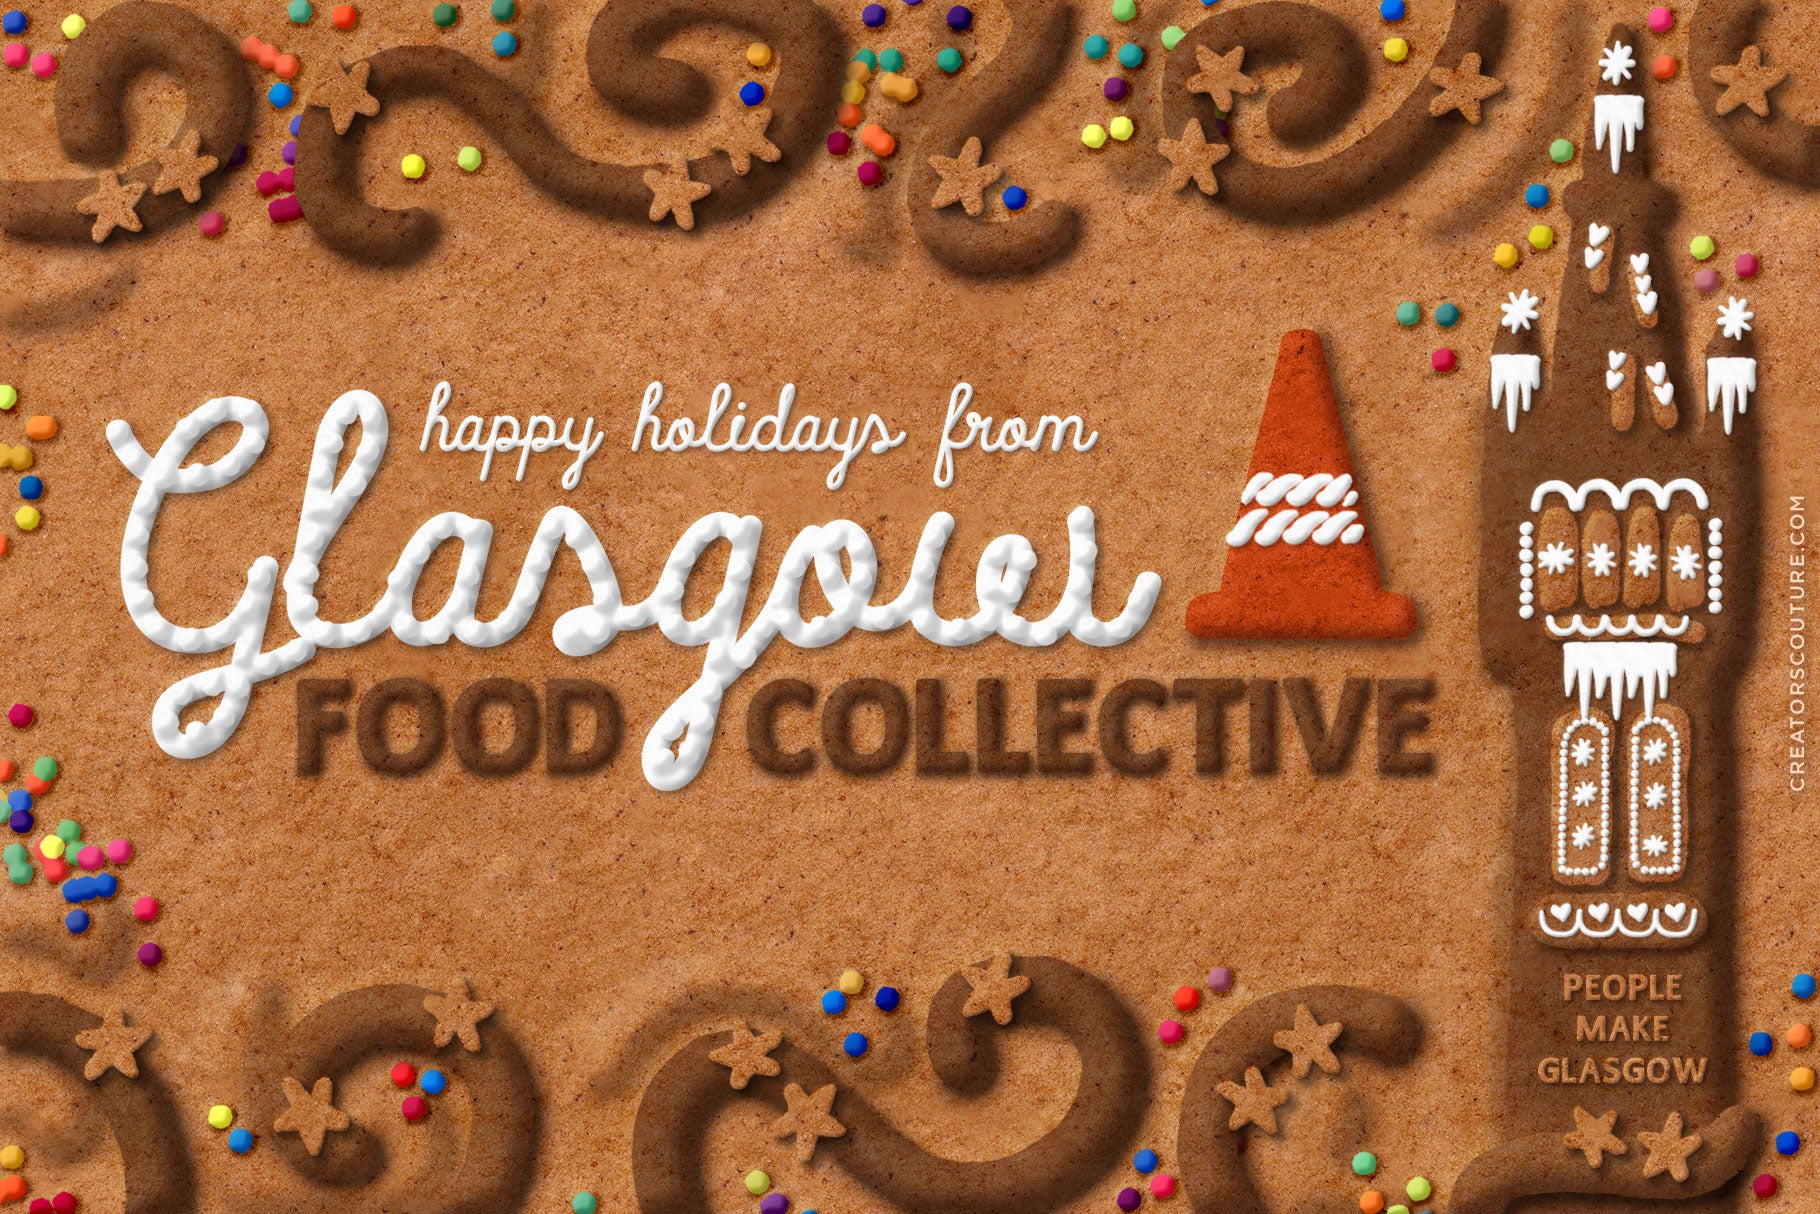 Gingerbread, Cookie, & Cake Graphic & Lettering Effects for Photoshop, gingerbread tower and cake